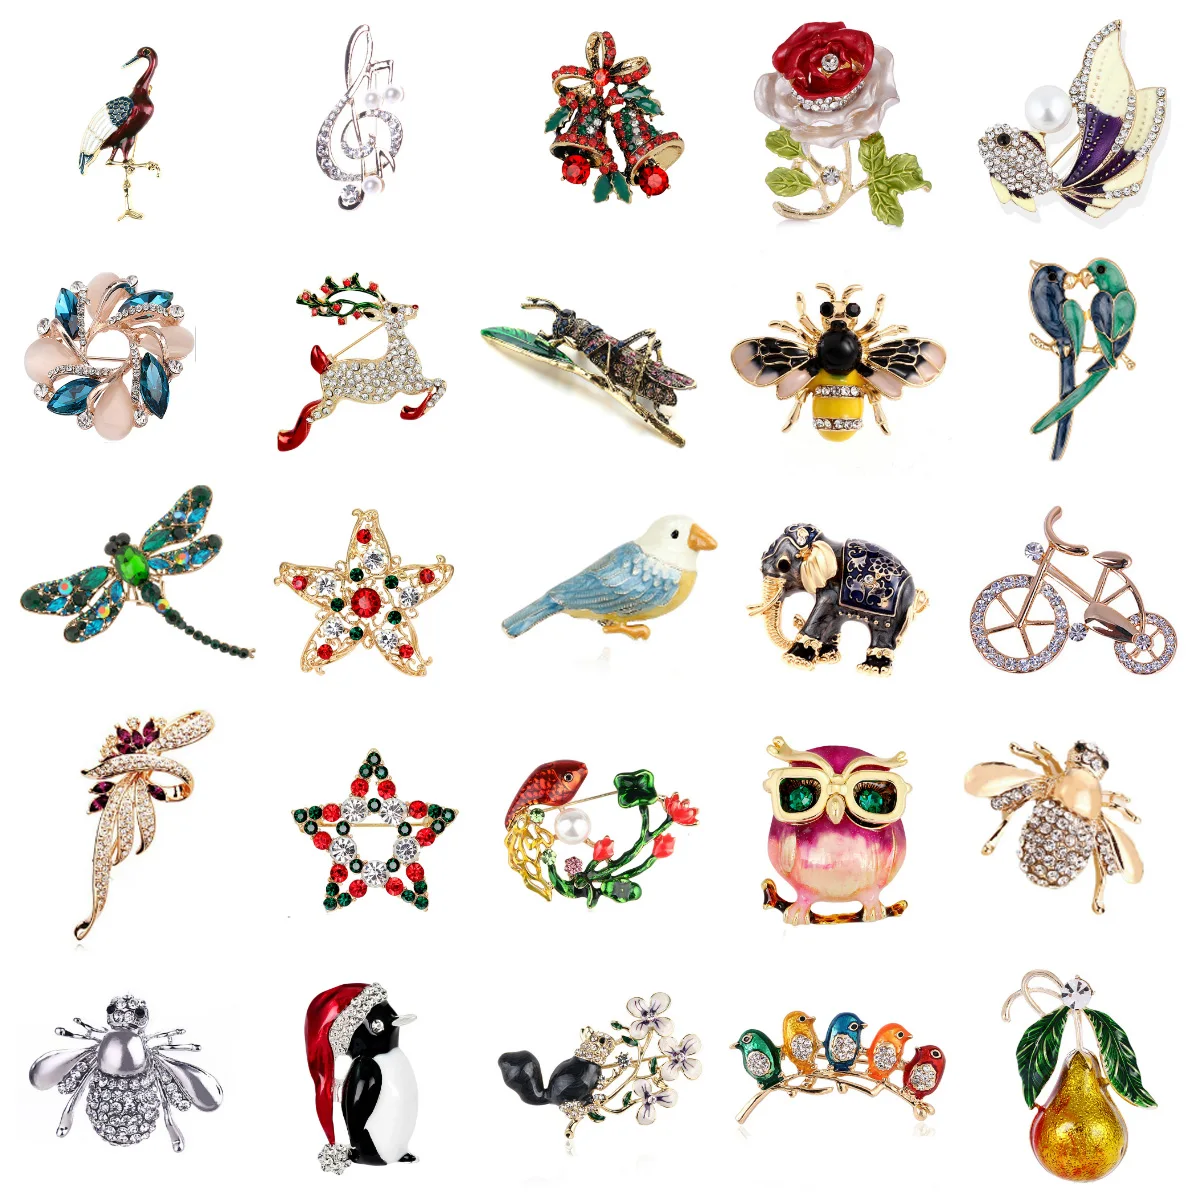 Bicycle Squirrel Owl Rose Flower Fish Elephant Bird Brooch Collar Pins Corsage Animal Badges Jewelry Women Kids Brooches